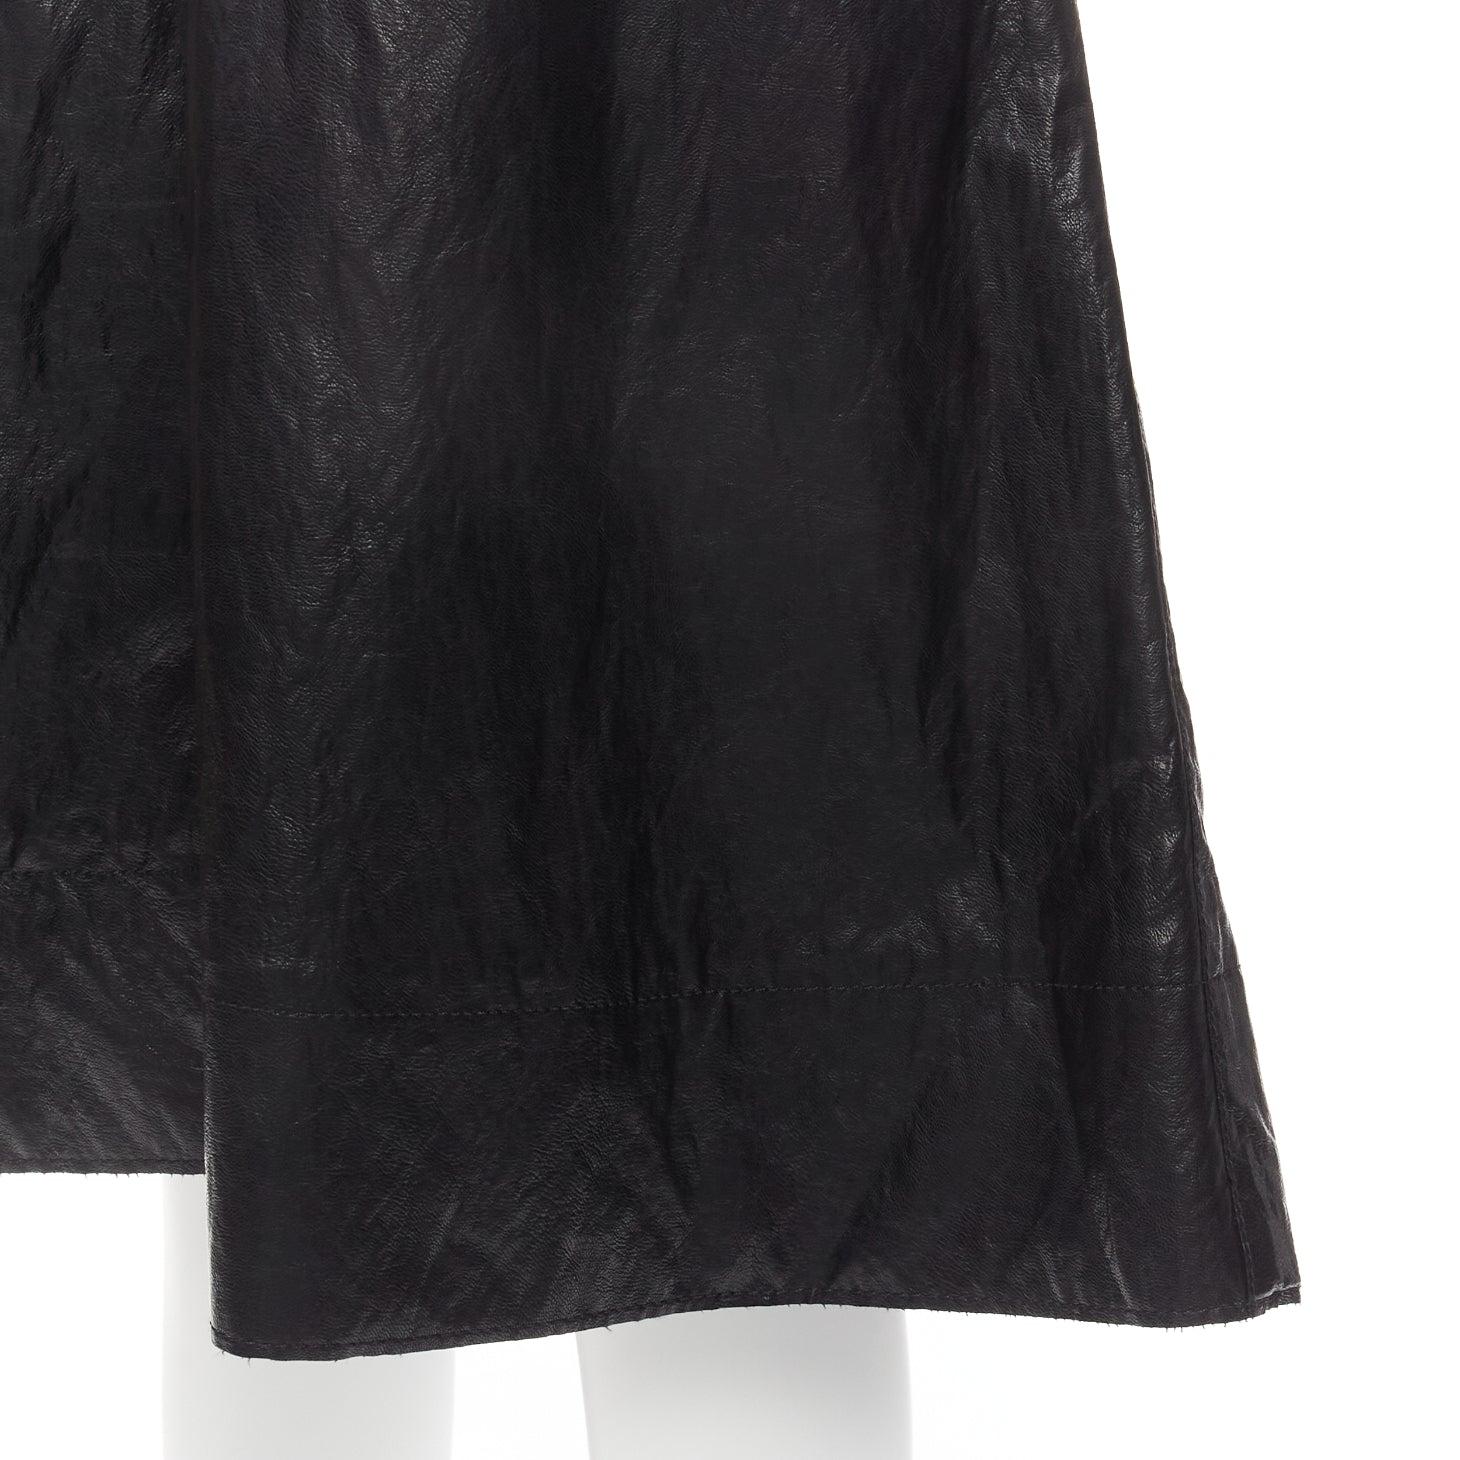 PHILOSOPHY DI LORENZO SERAFINI black faux crinkled leather A-line skirt IT38 XS For Sale 3